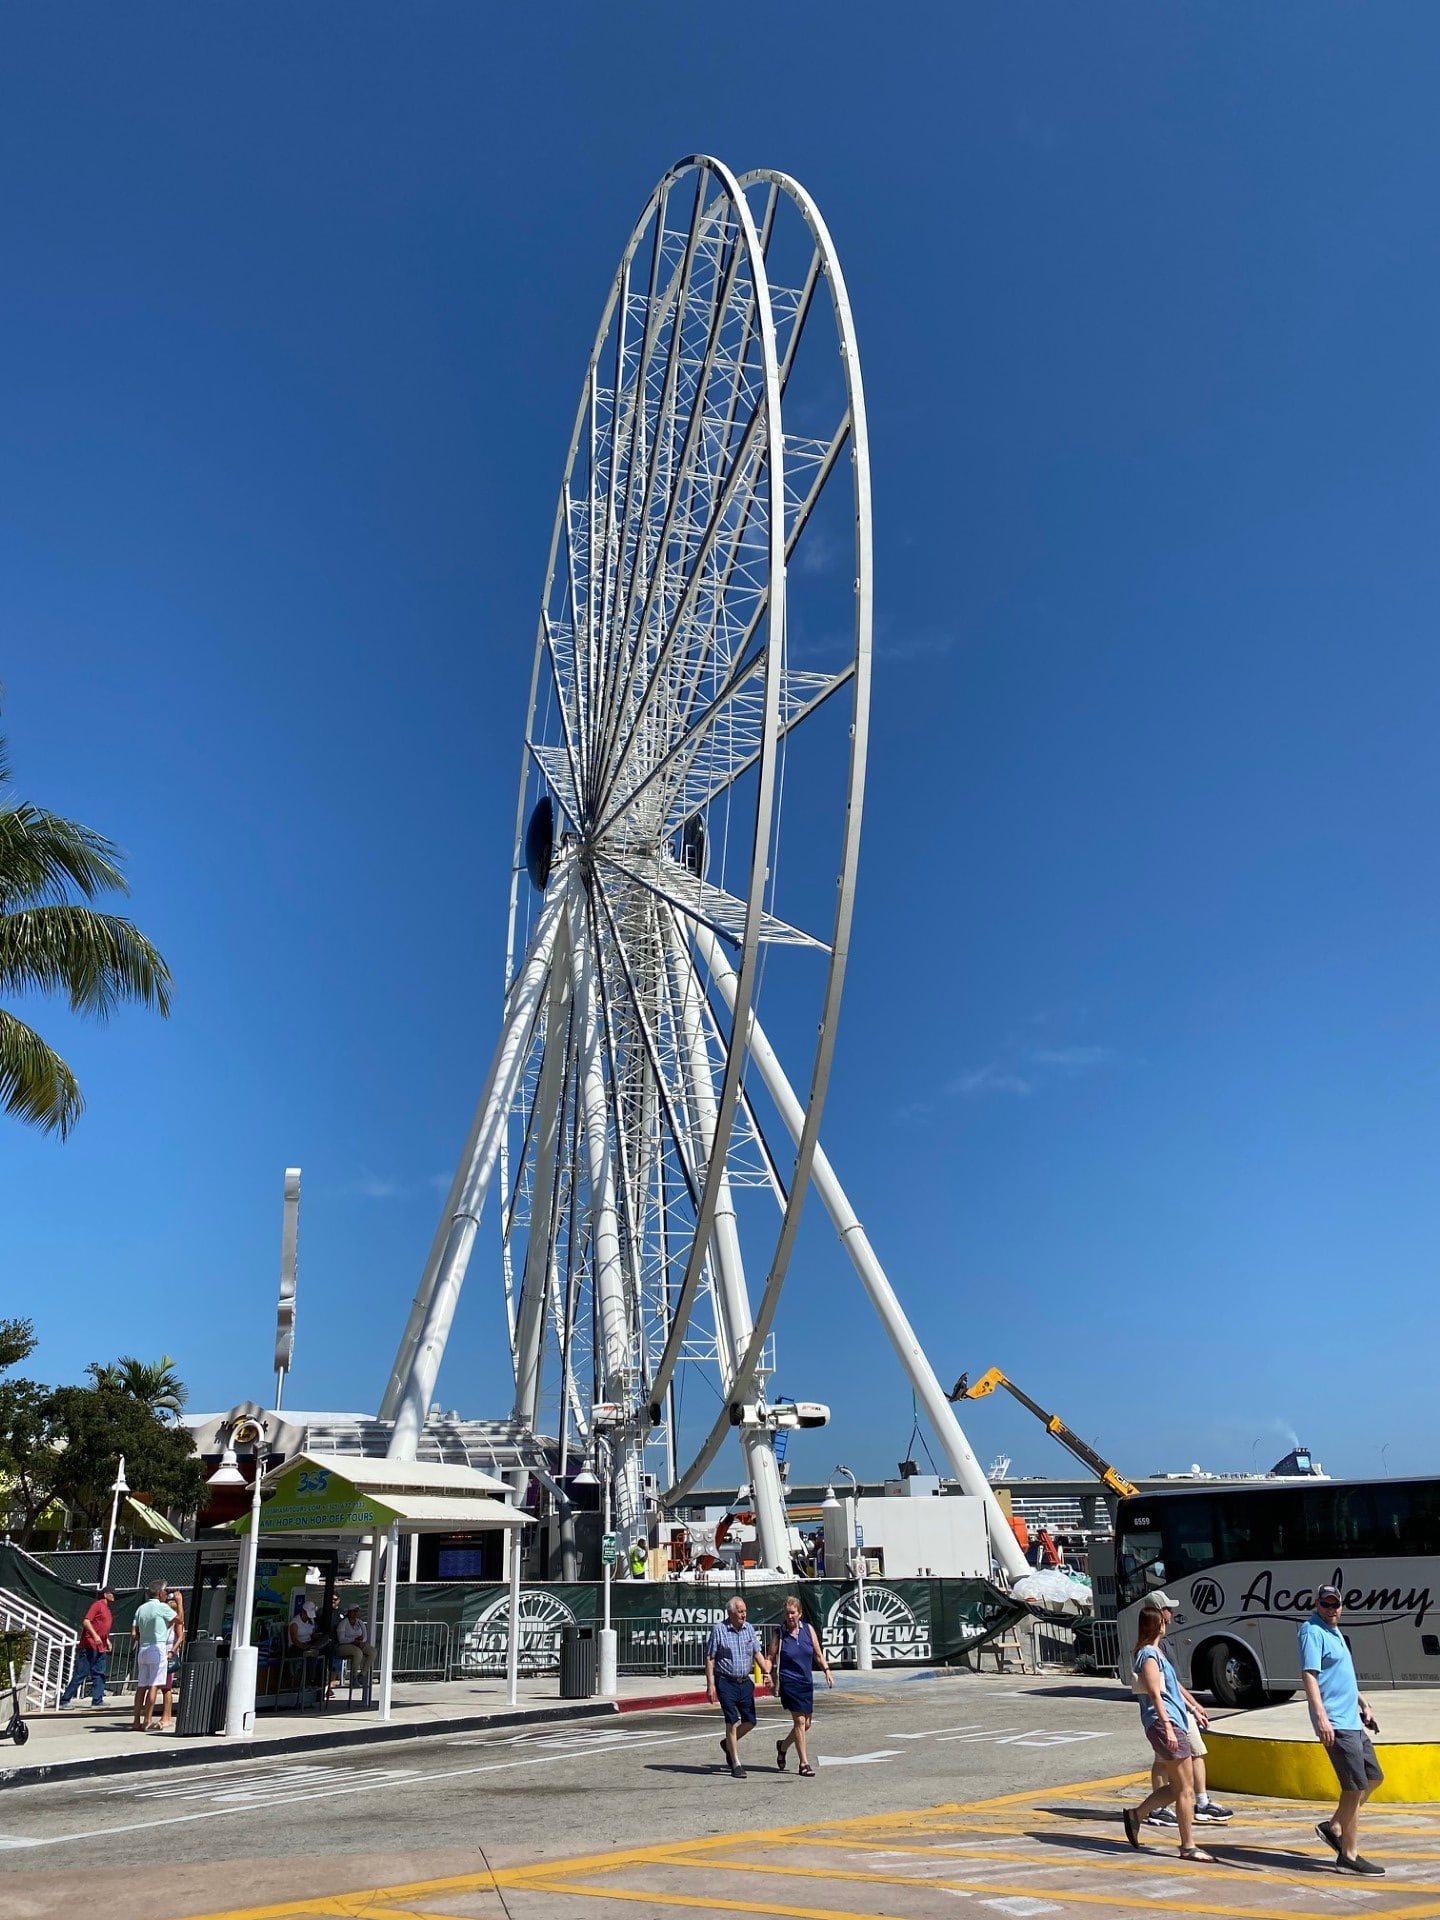 Opening Date Nearing For Ferris Wheel at Bayside